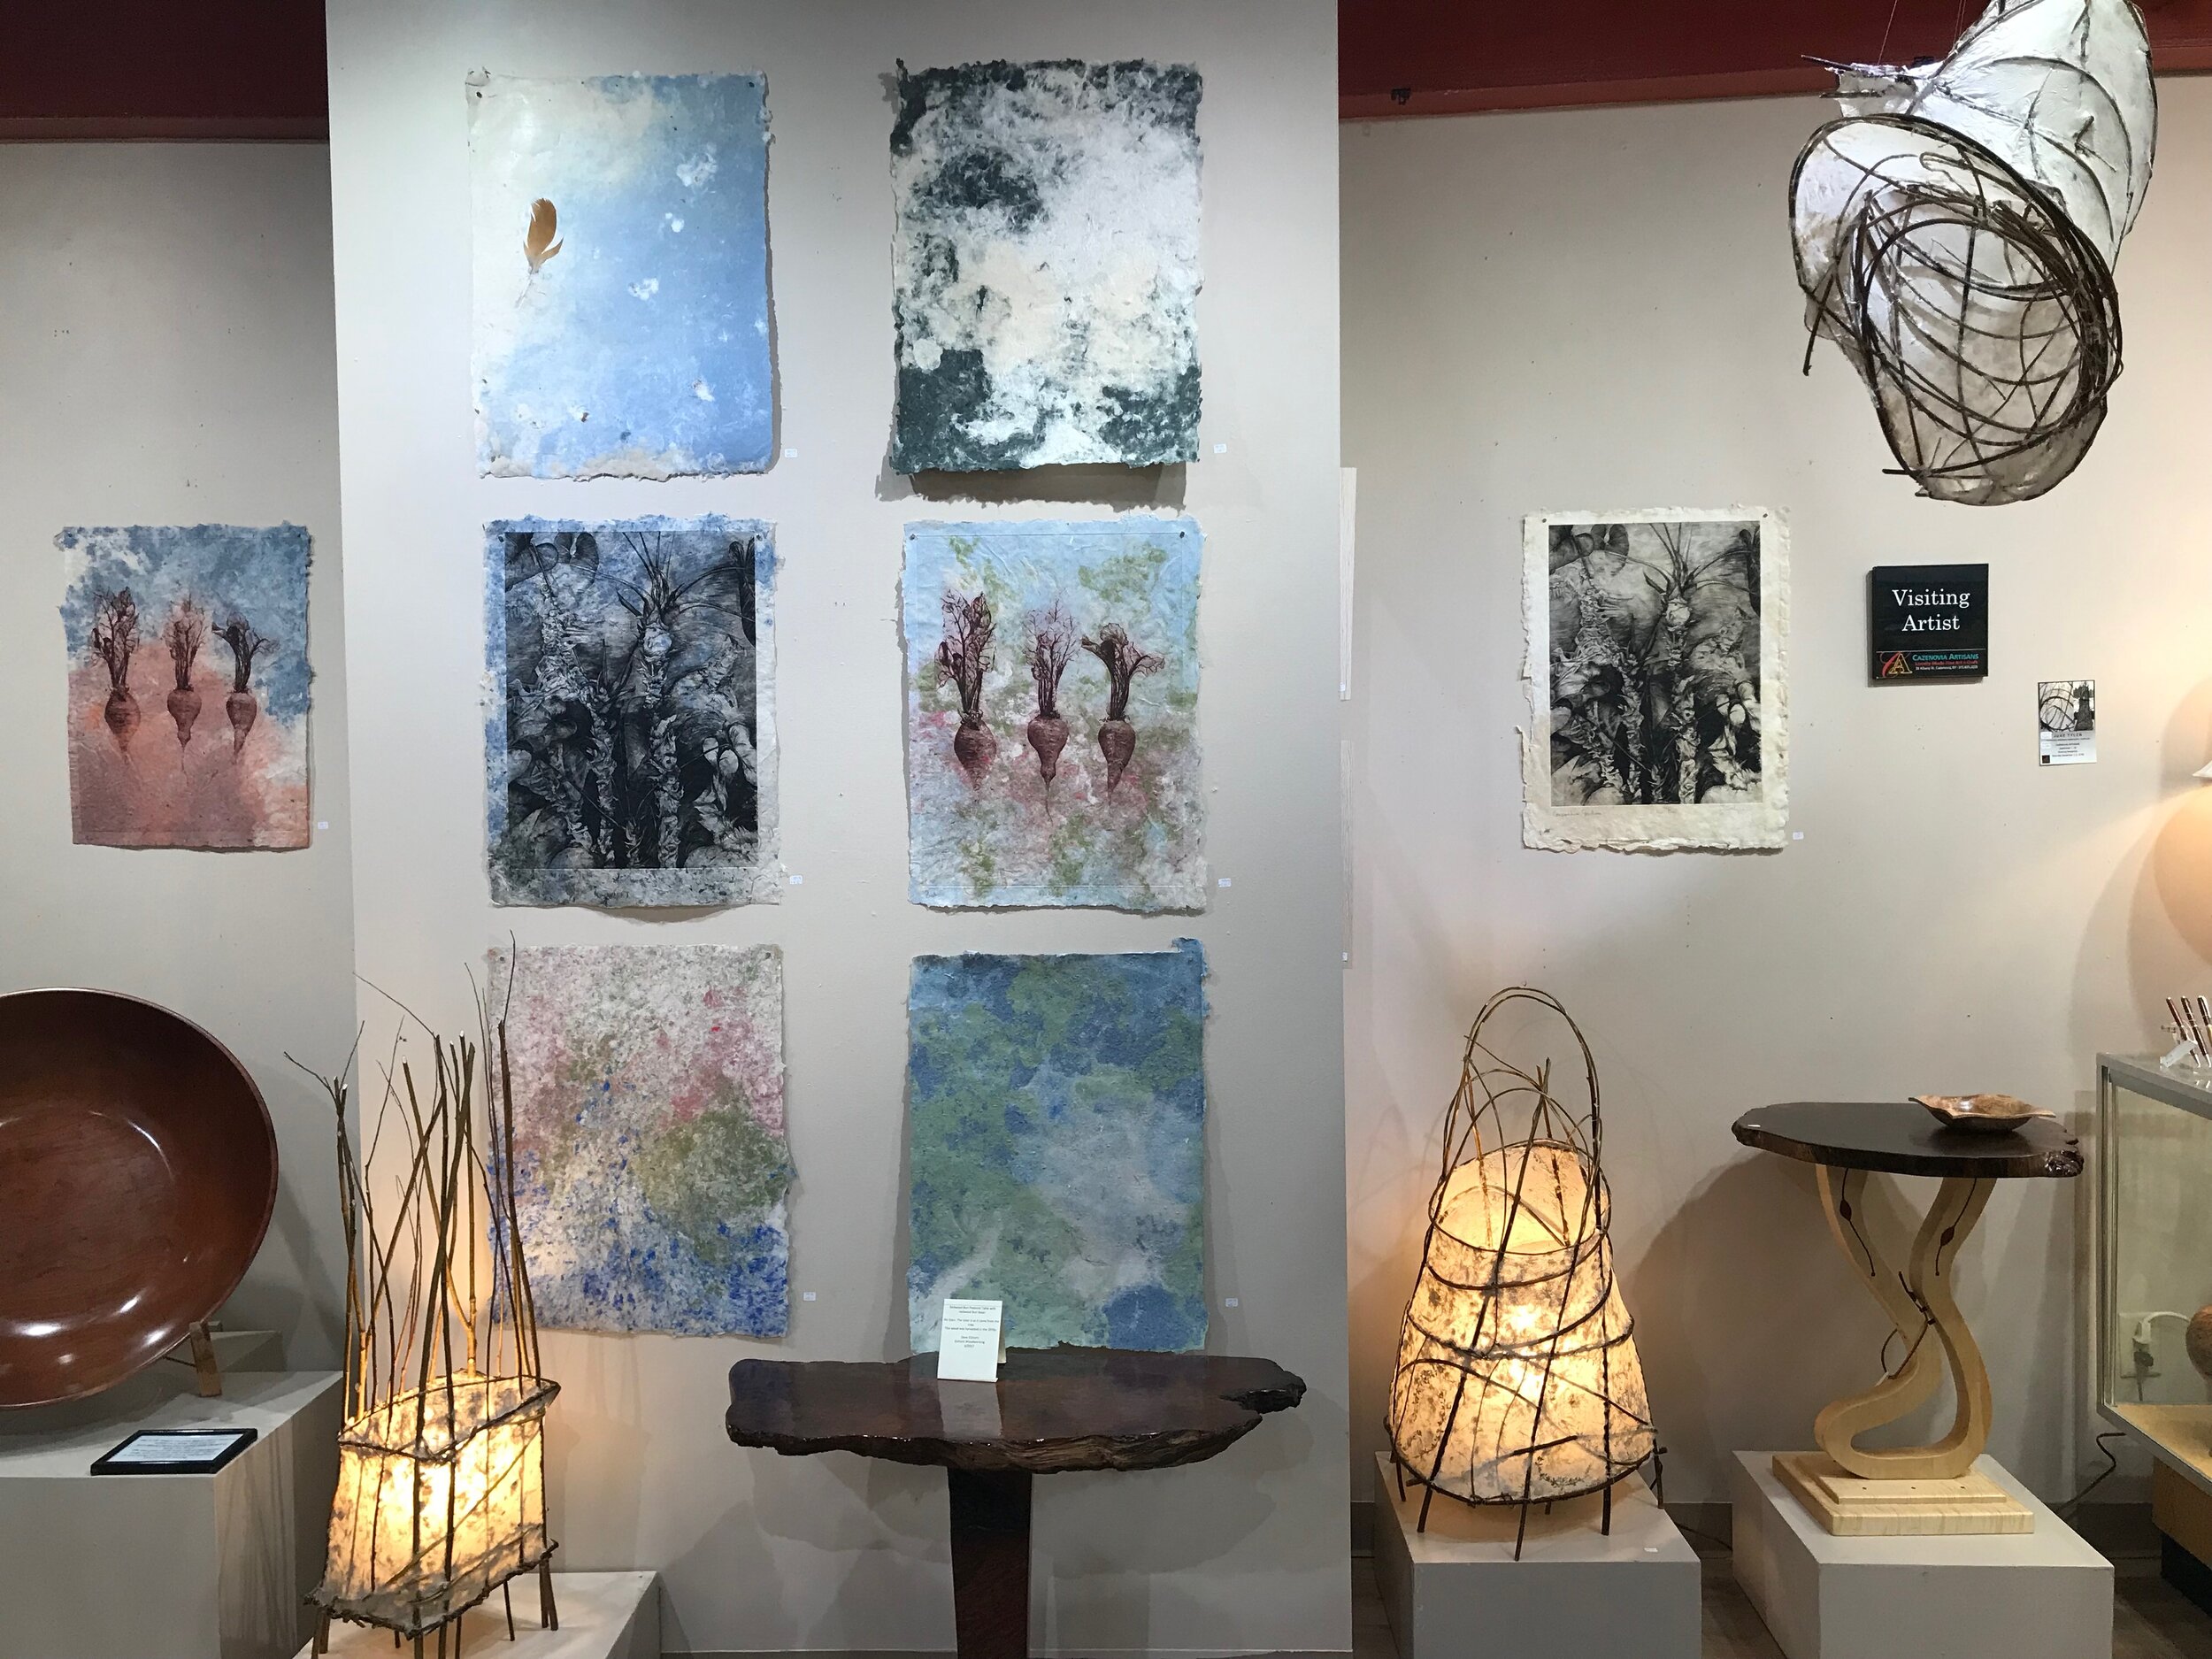 Exhibition at Artisan Gallery in Cazenovia, NY that includes my intaglio prints on my handmade paper and my luminaire with willow and handmade paper from Kozo (mulberry.)